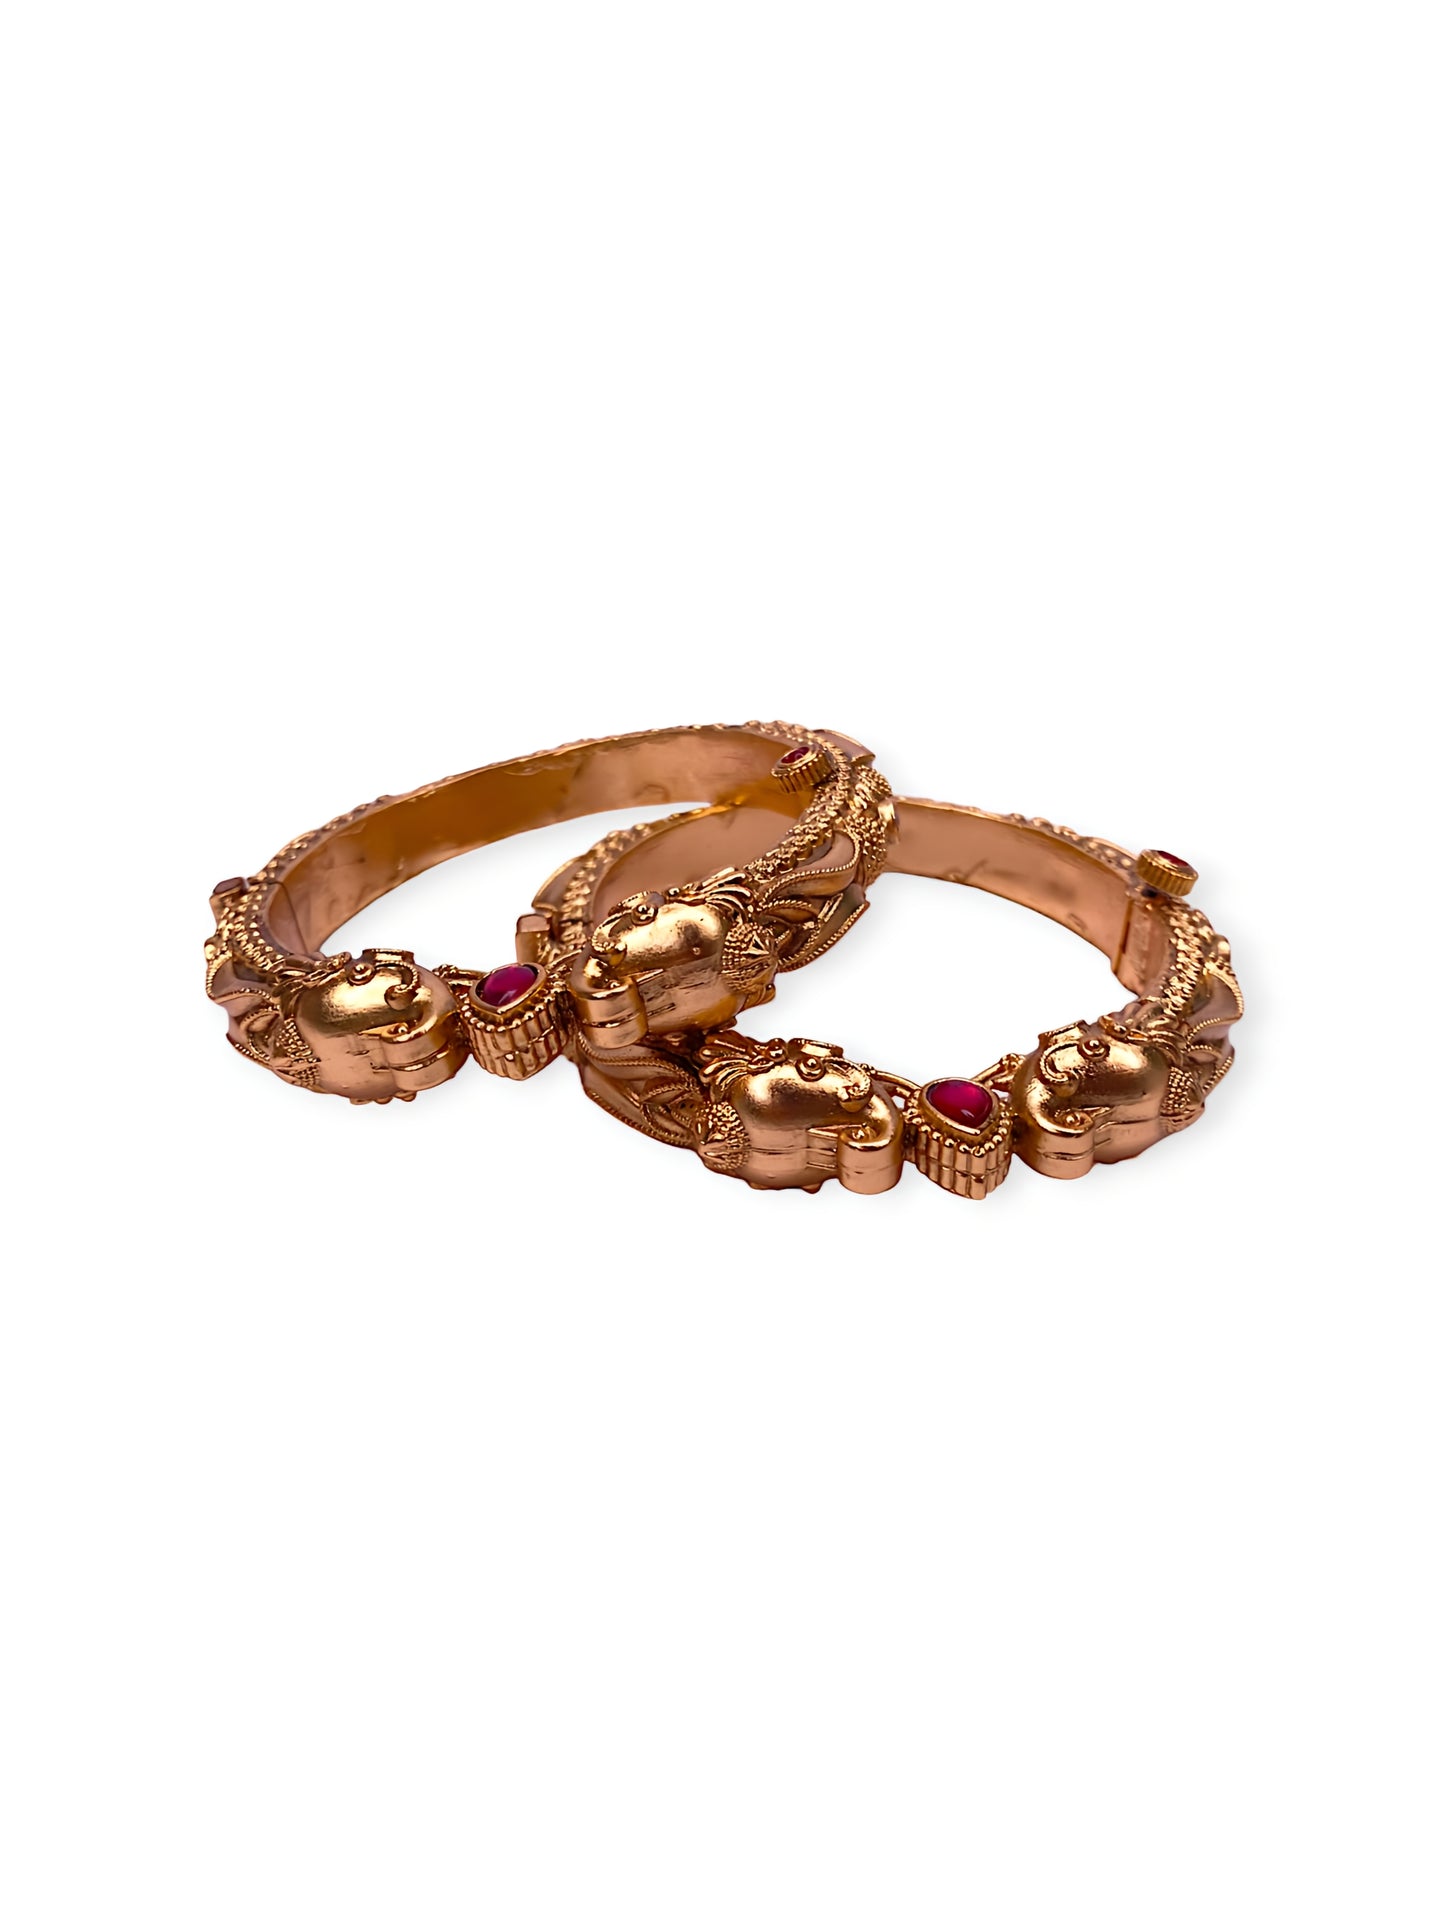 Antique Gold Finish Temple Work Bangles